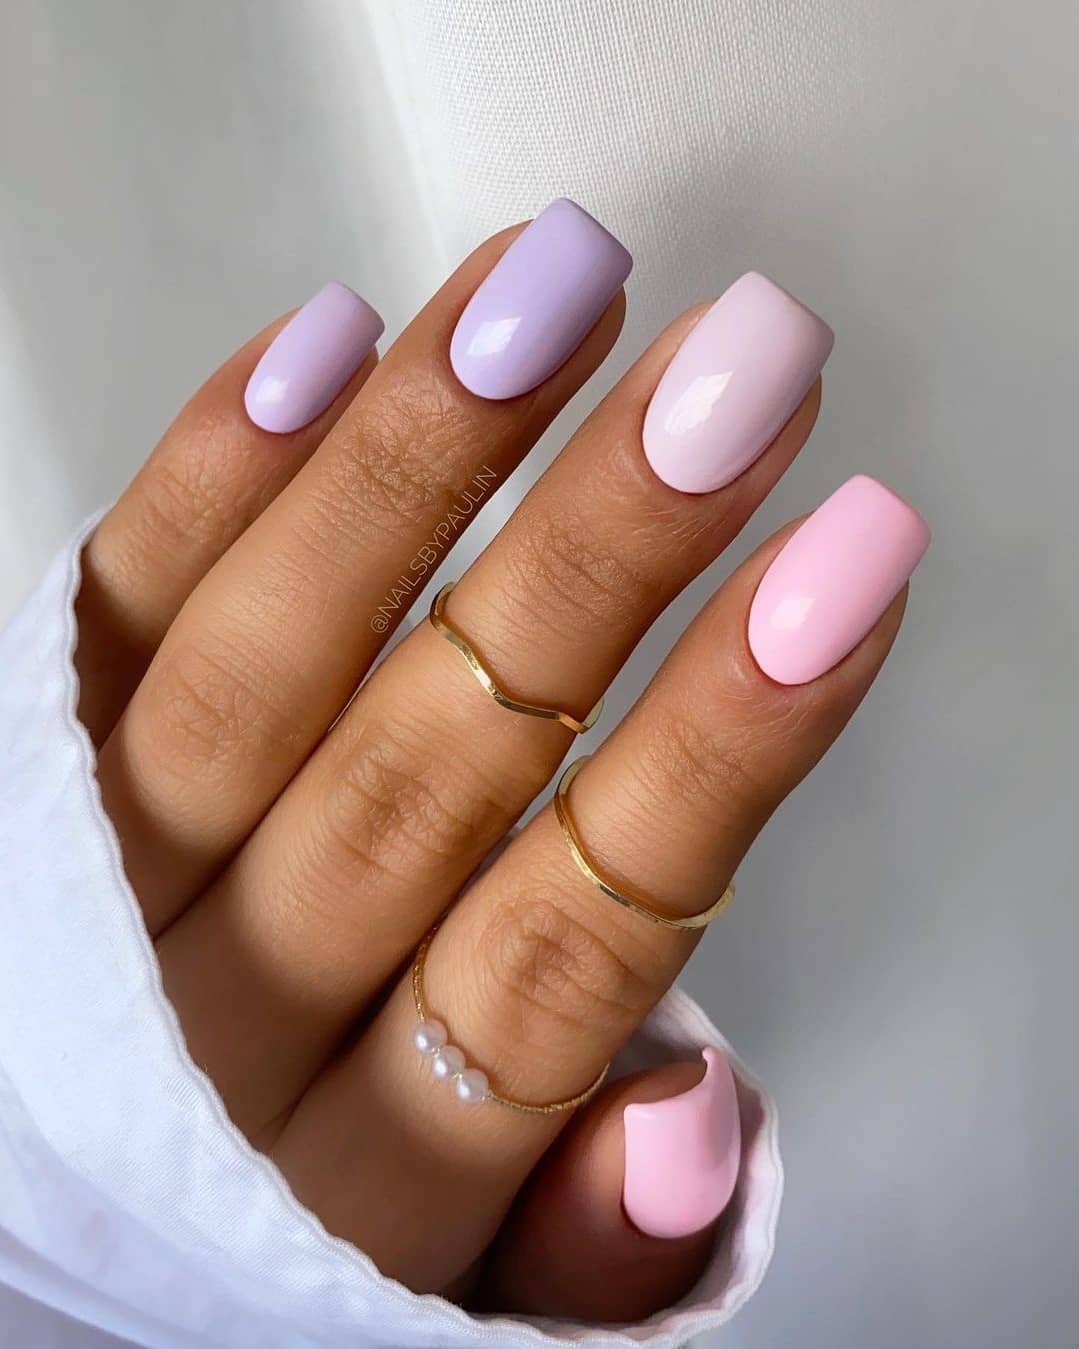 25 Trending Summer Nail Colors And Designs For 2021 images 17